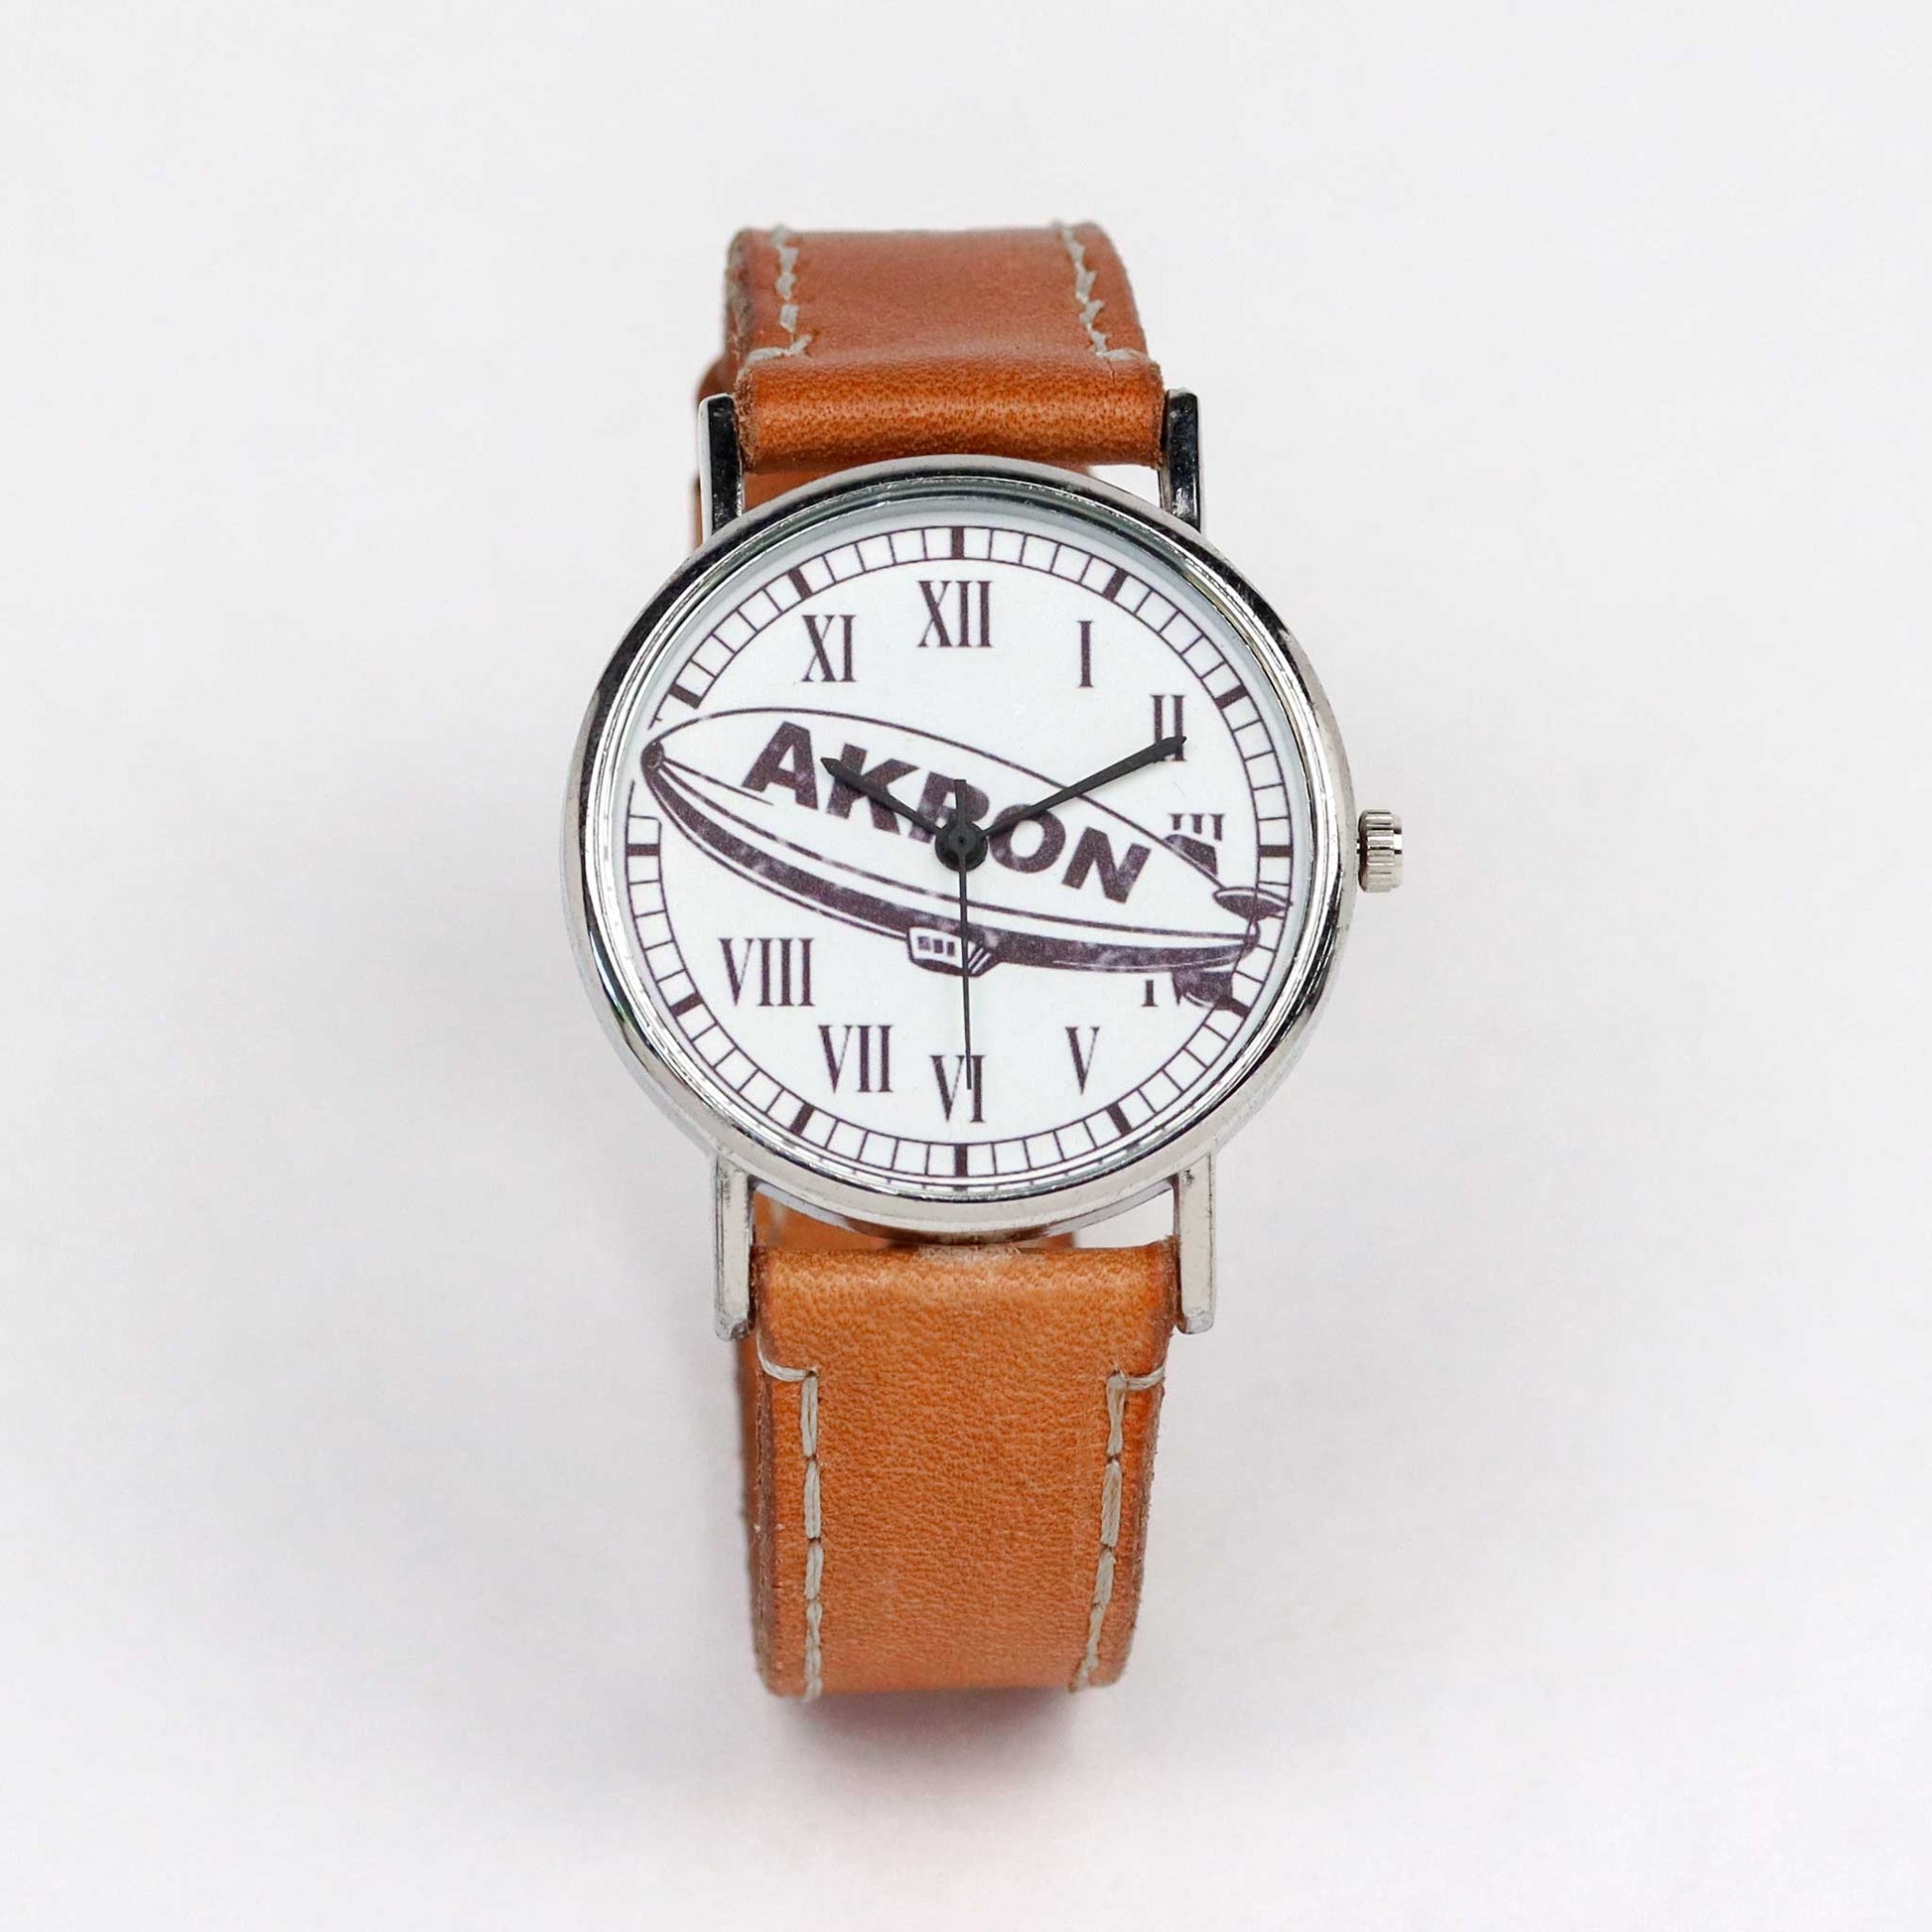 city of akron wrist watch with brown strap